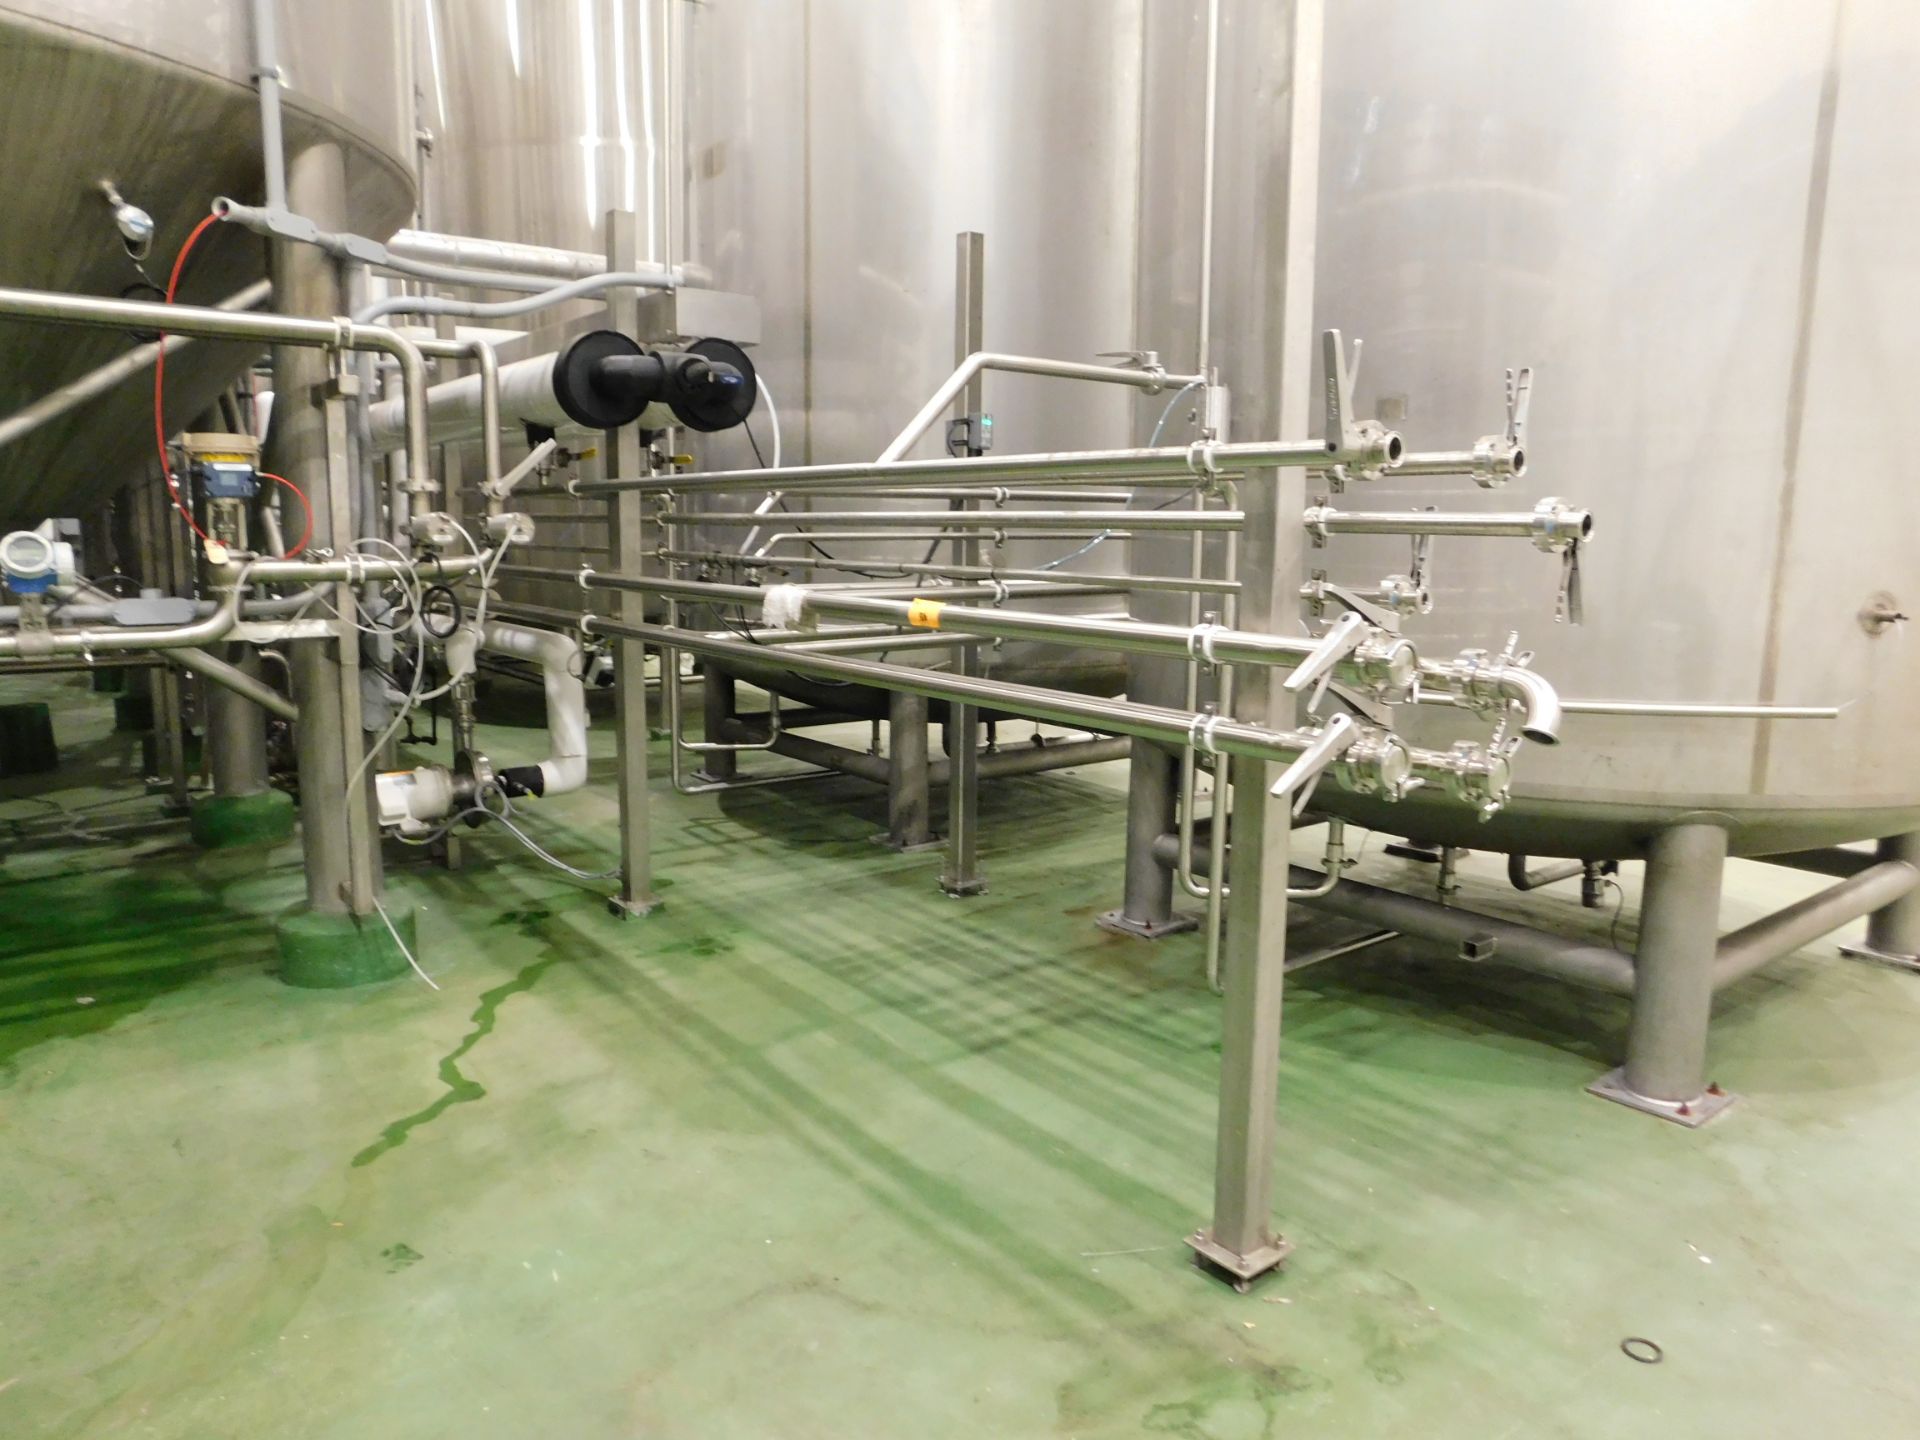 Stainless Steel Piping - Image 8 of 8